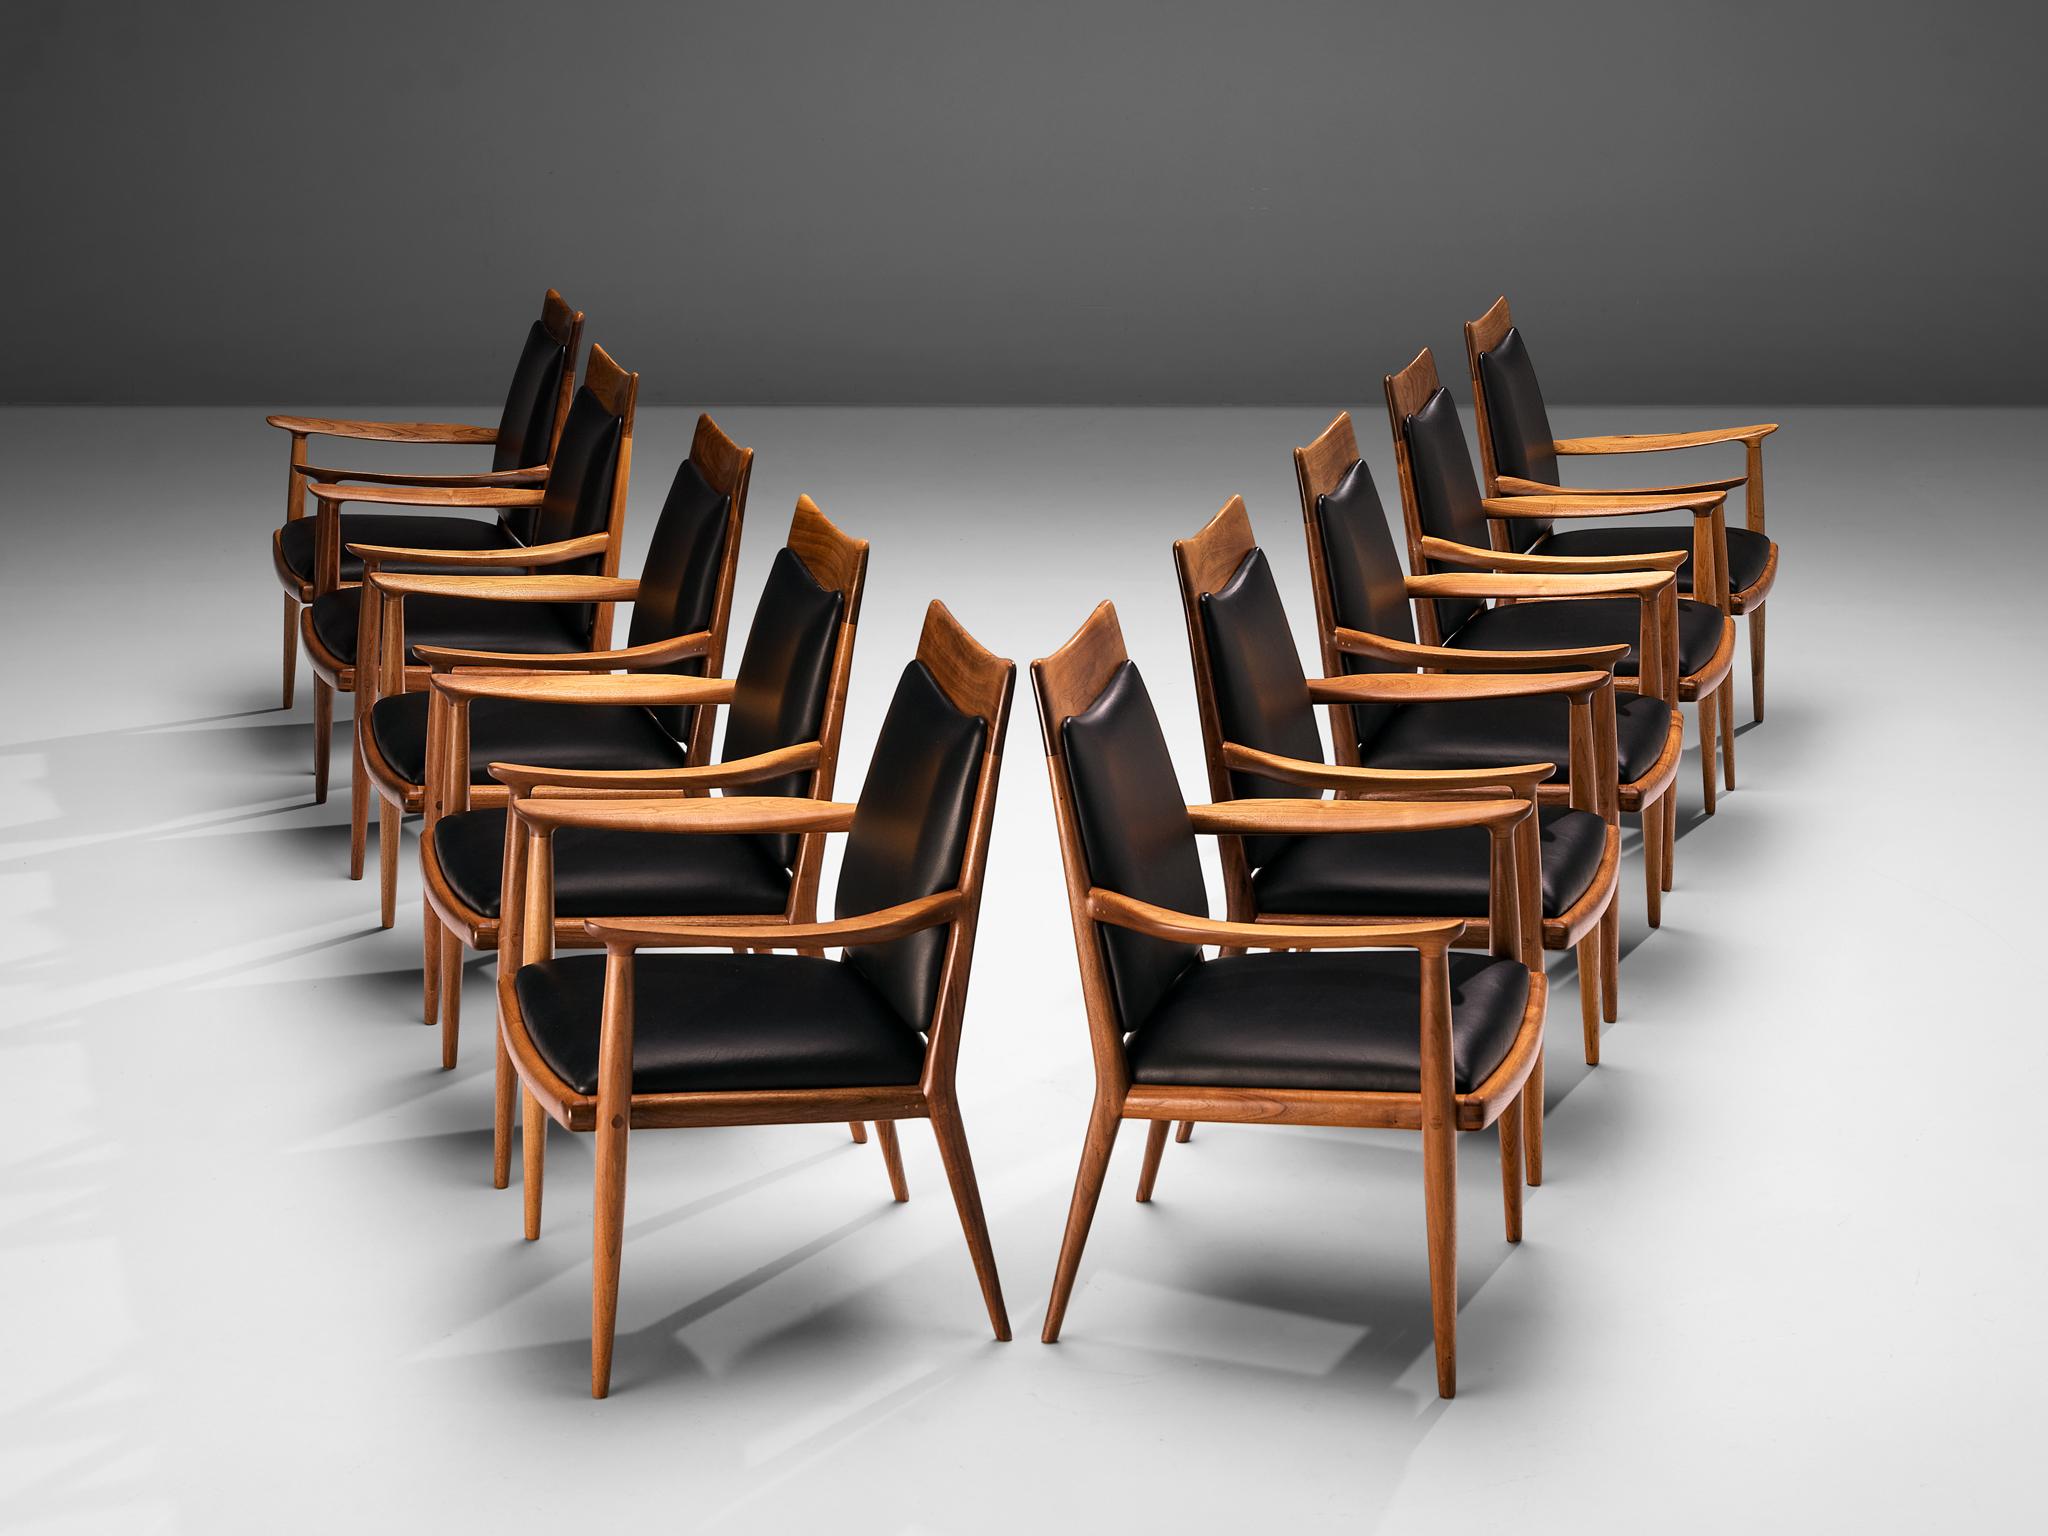 Sam Maloof, set of dining chairs, walnut, black leather, United States, 1960s

Exquisite set of ten armchairs by renowned American designer Sam Maloof. Famous for his handcrafted furniture with strong lines, expressive grain and admirable joints